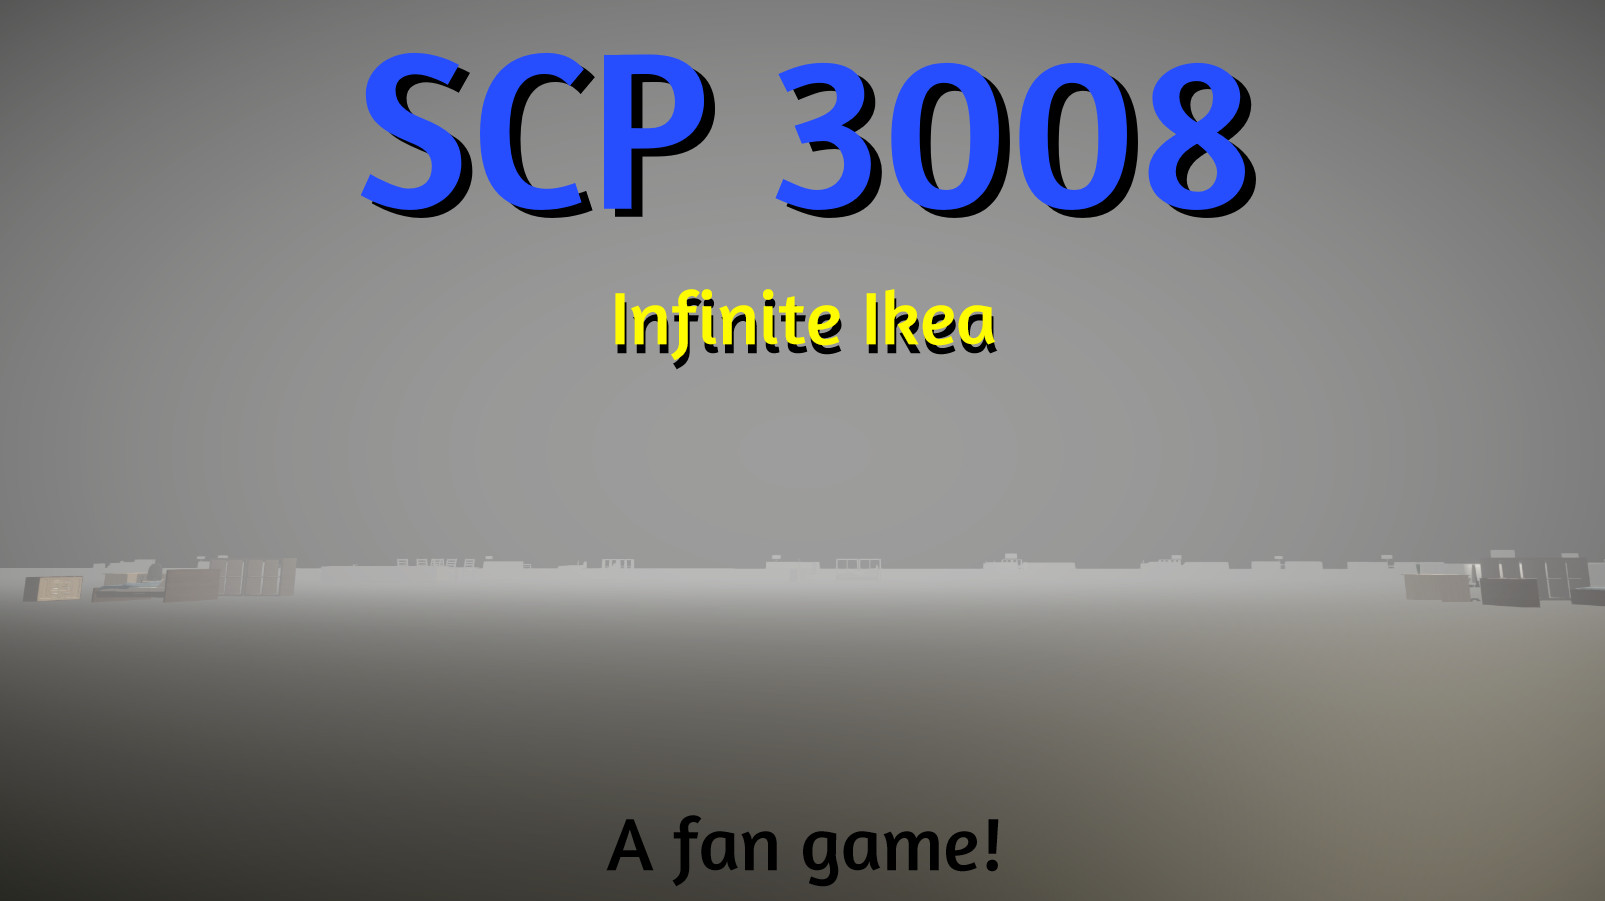 SCP-3008: Image Gallery (List View)